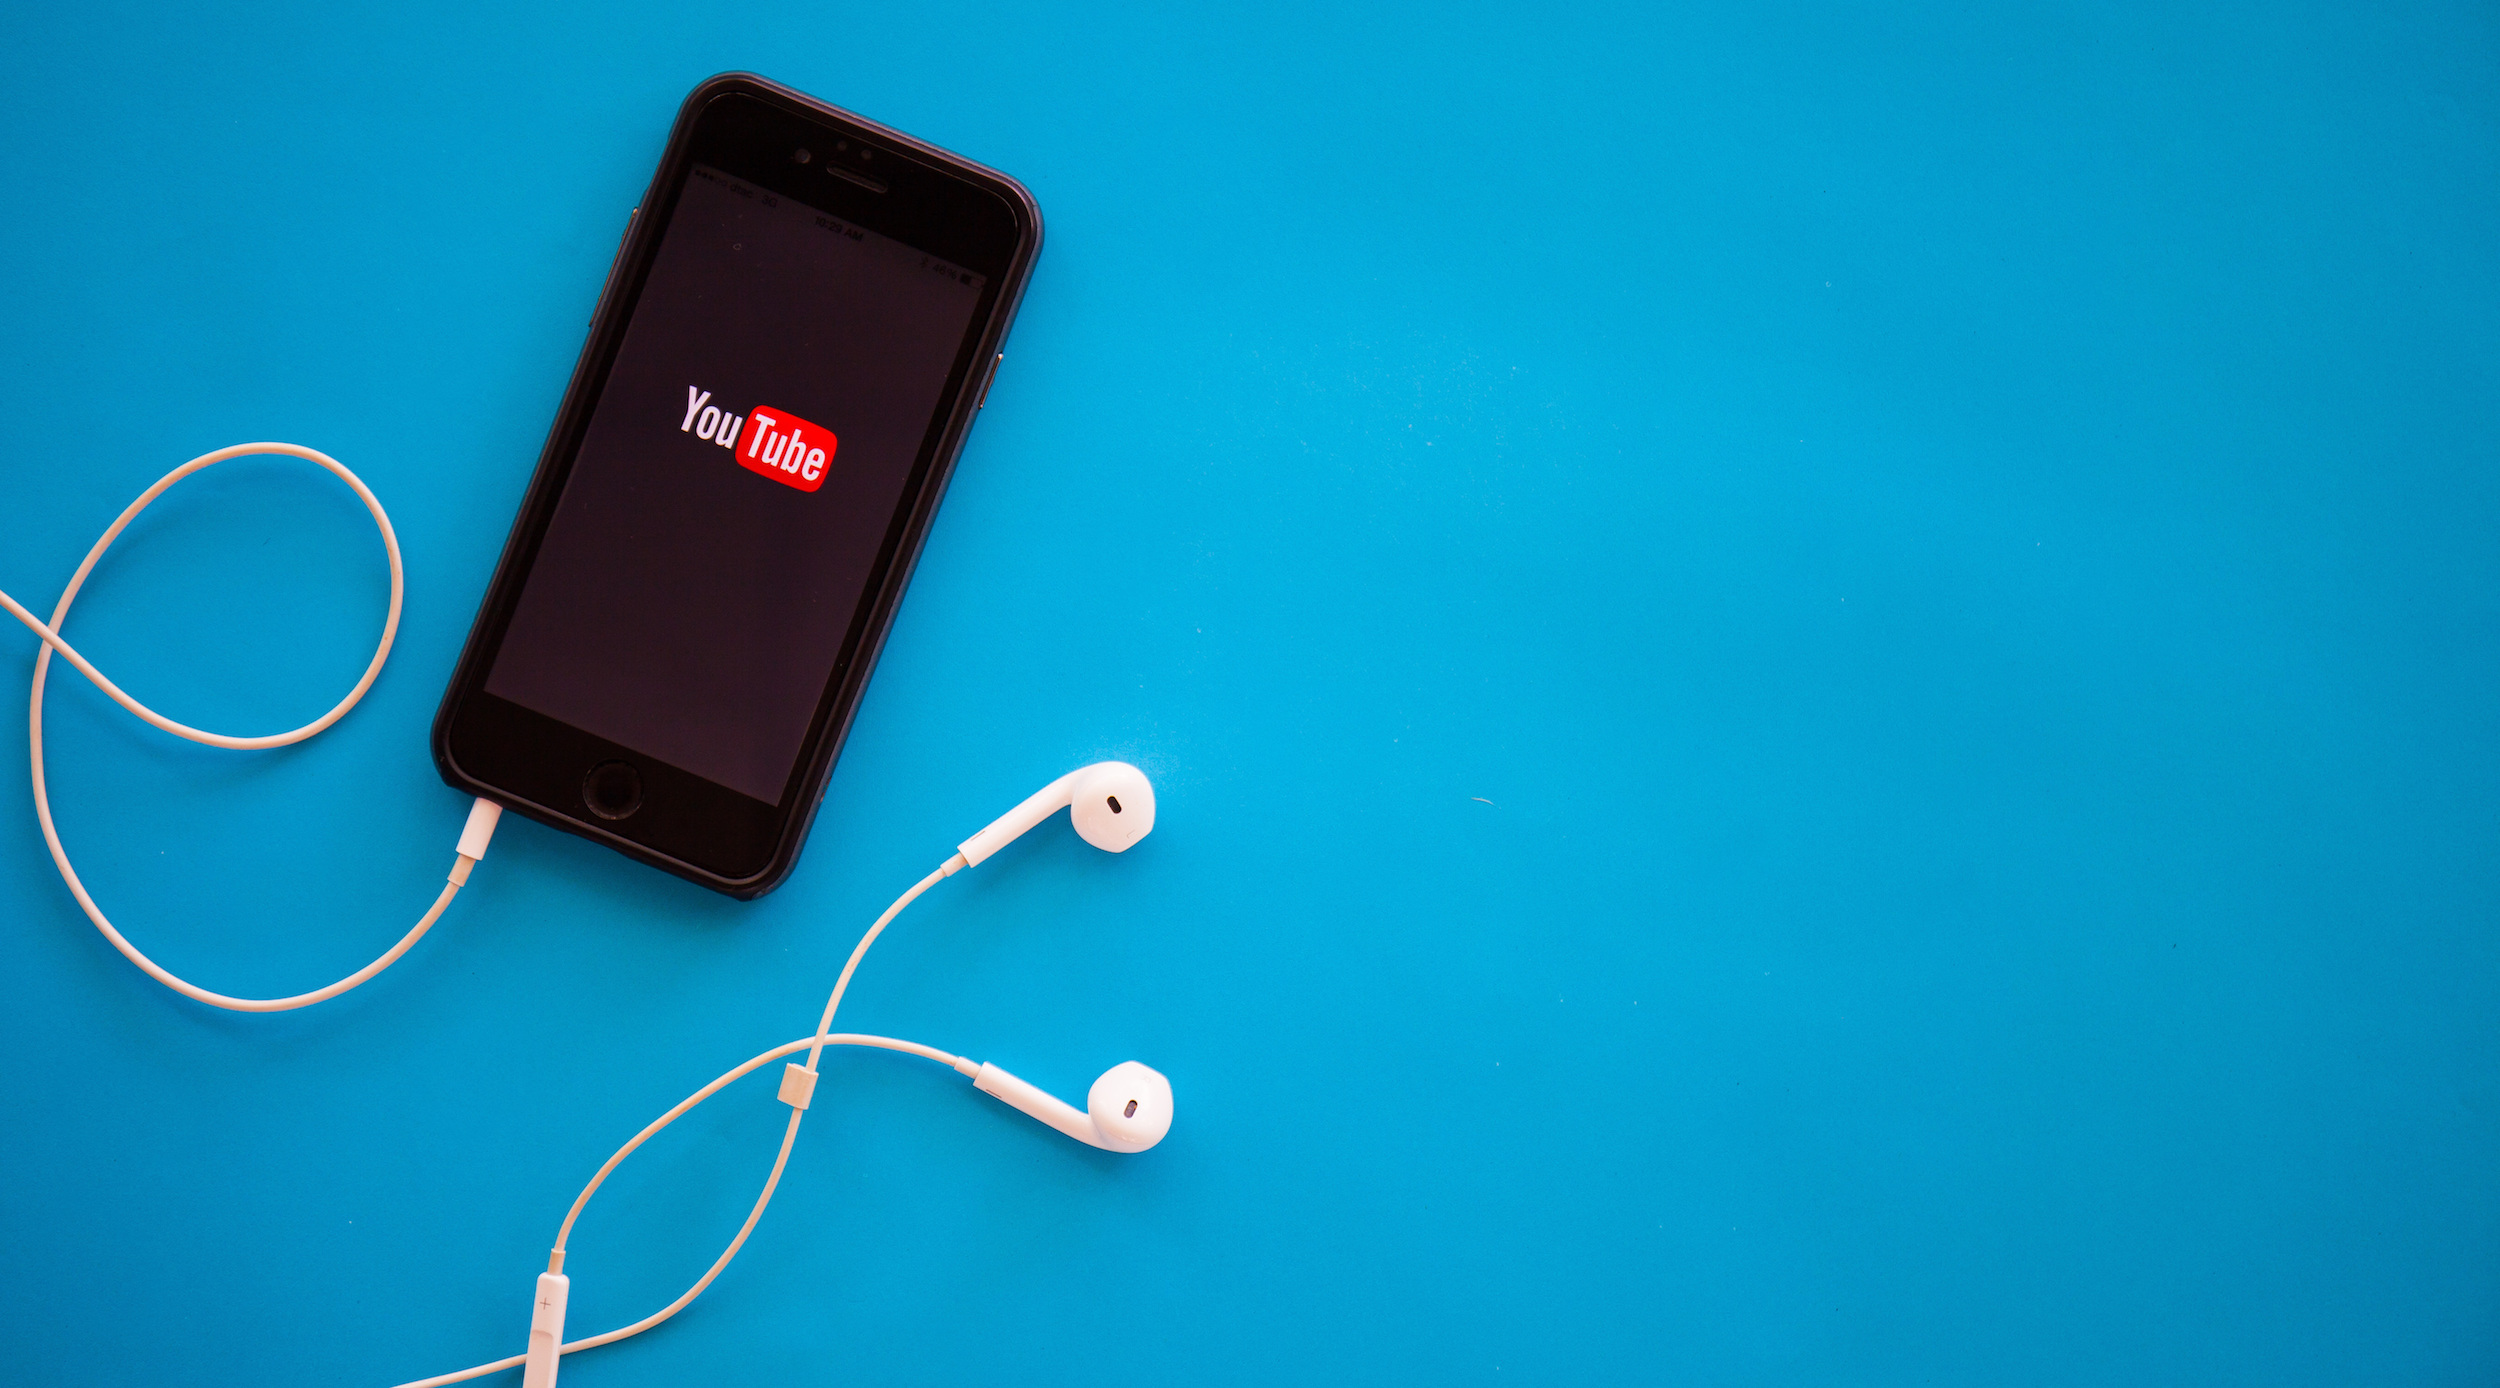 Will YouTube Music get Australians to subscribe?